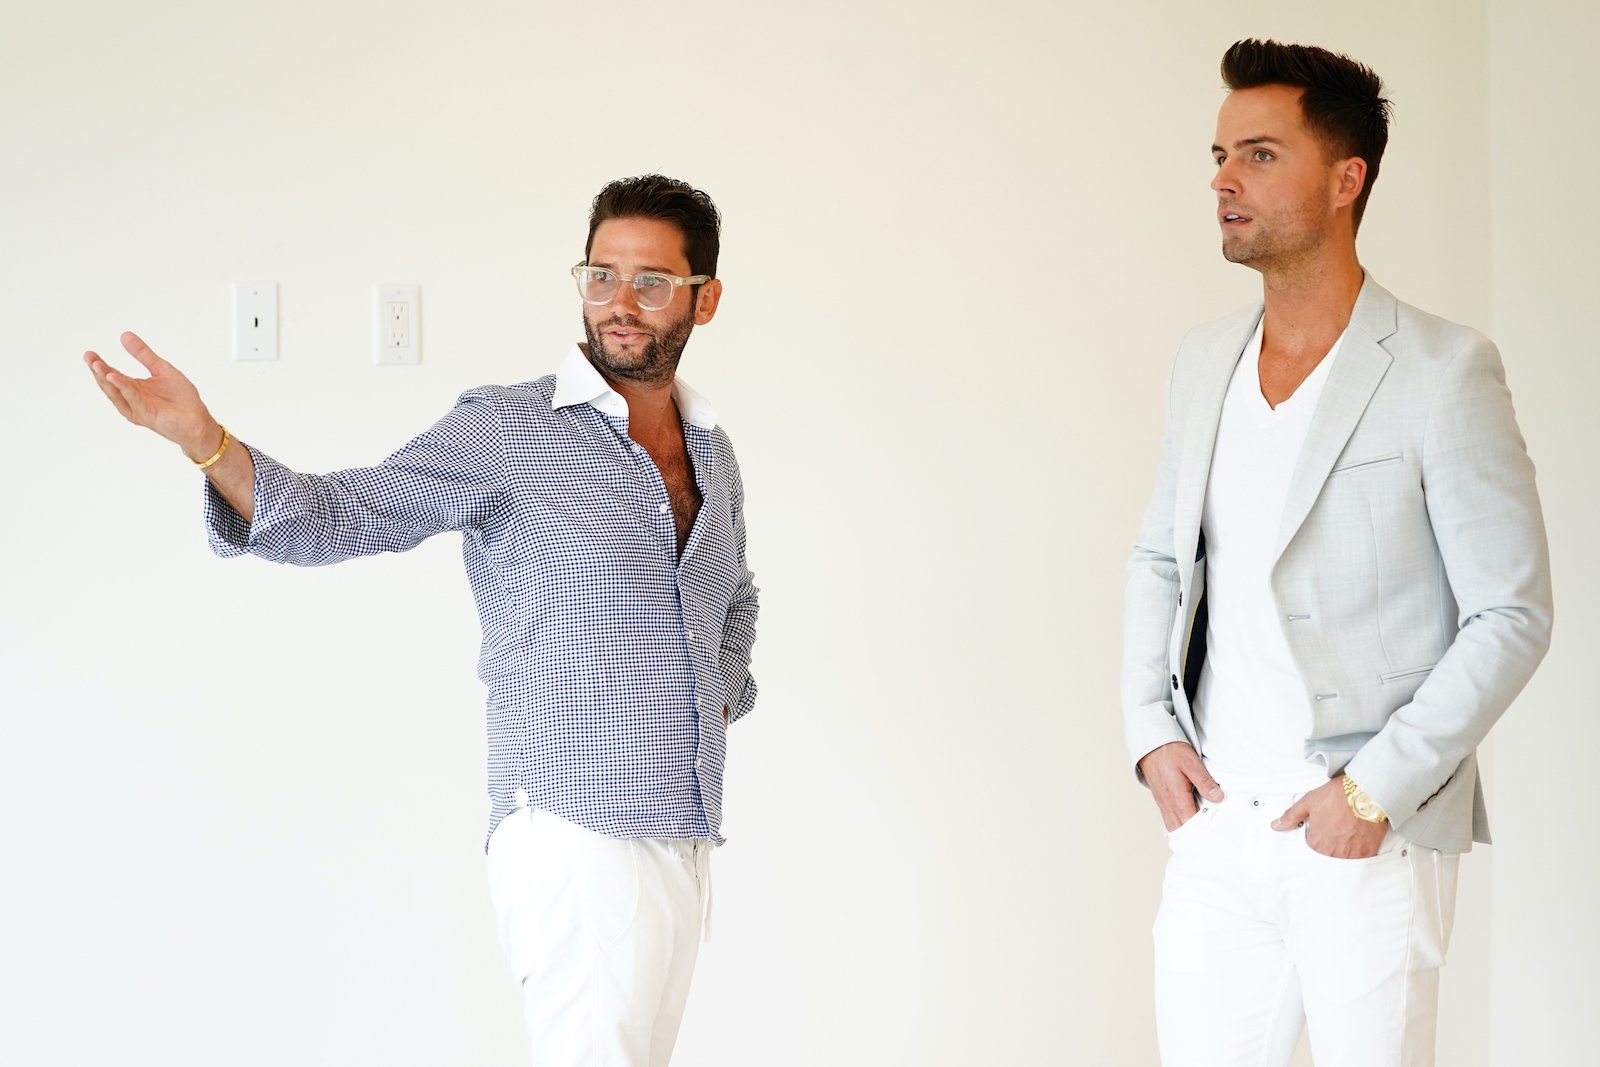 Josh Flagg from 'Million Dollar Listing' and Bobby Boyd tour a home